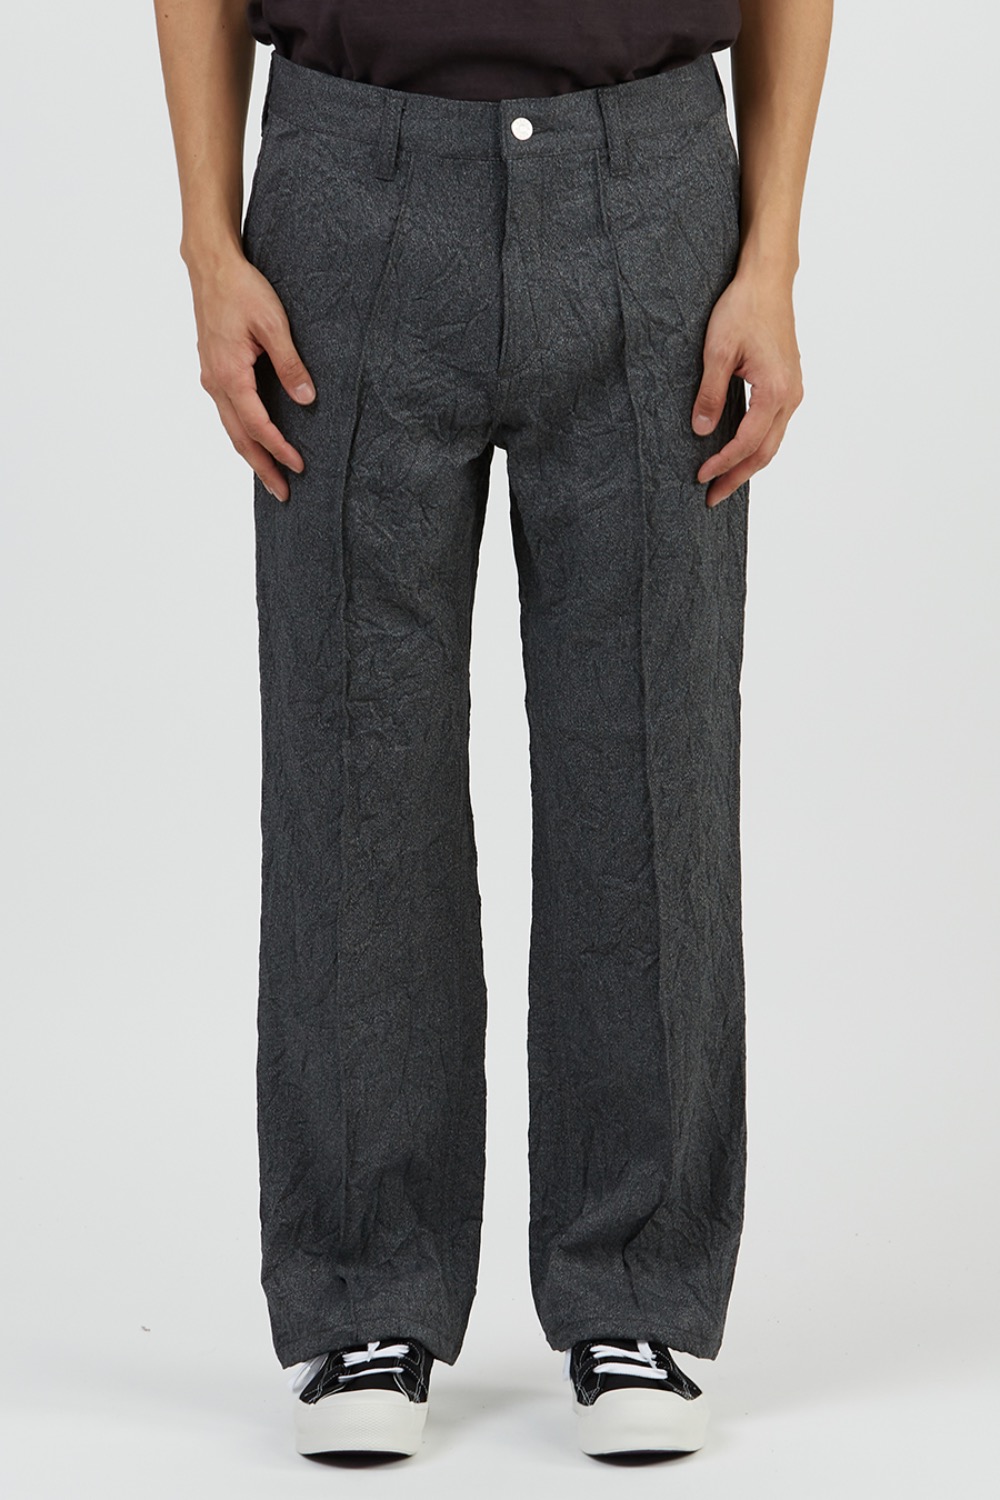 WRINKLED TROUSERS GREY